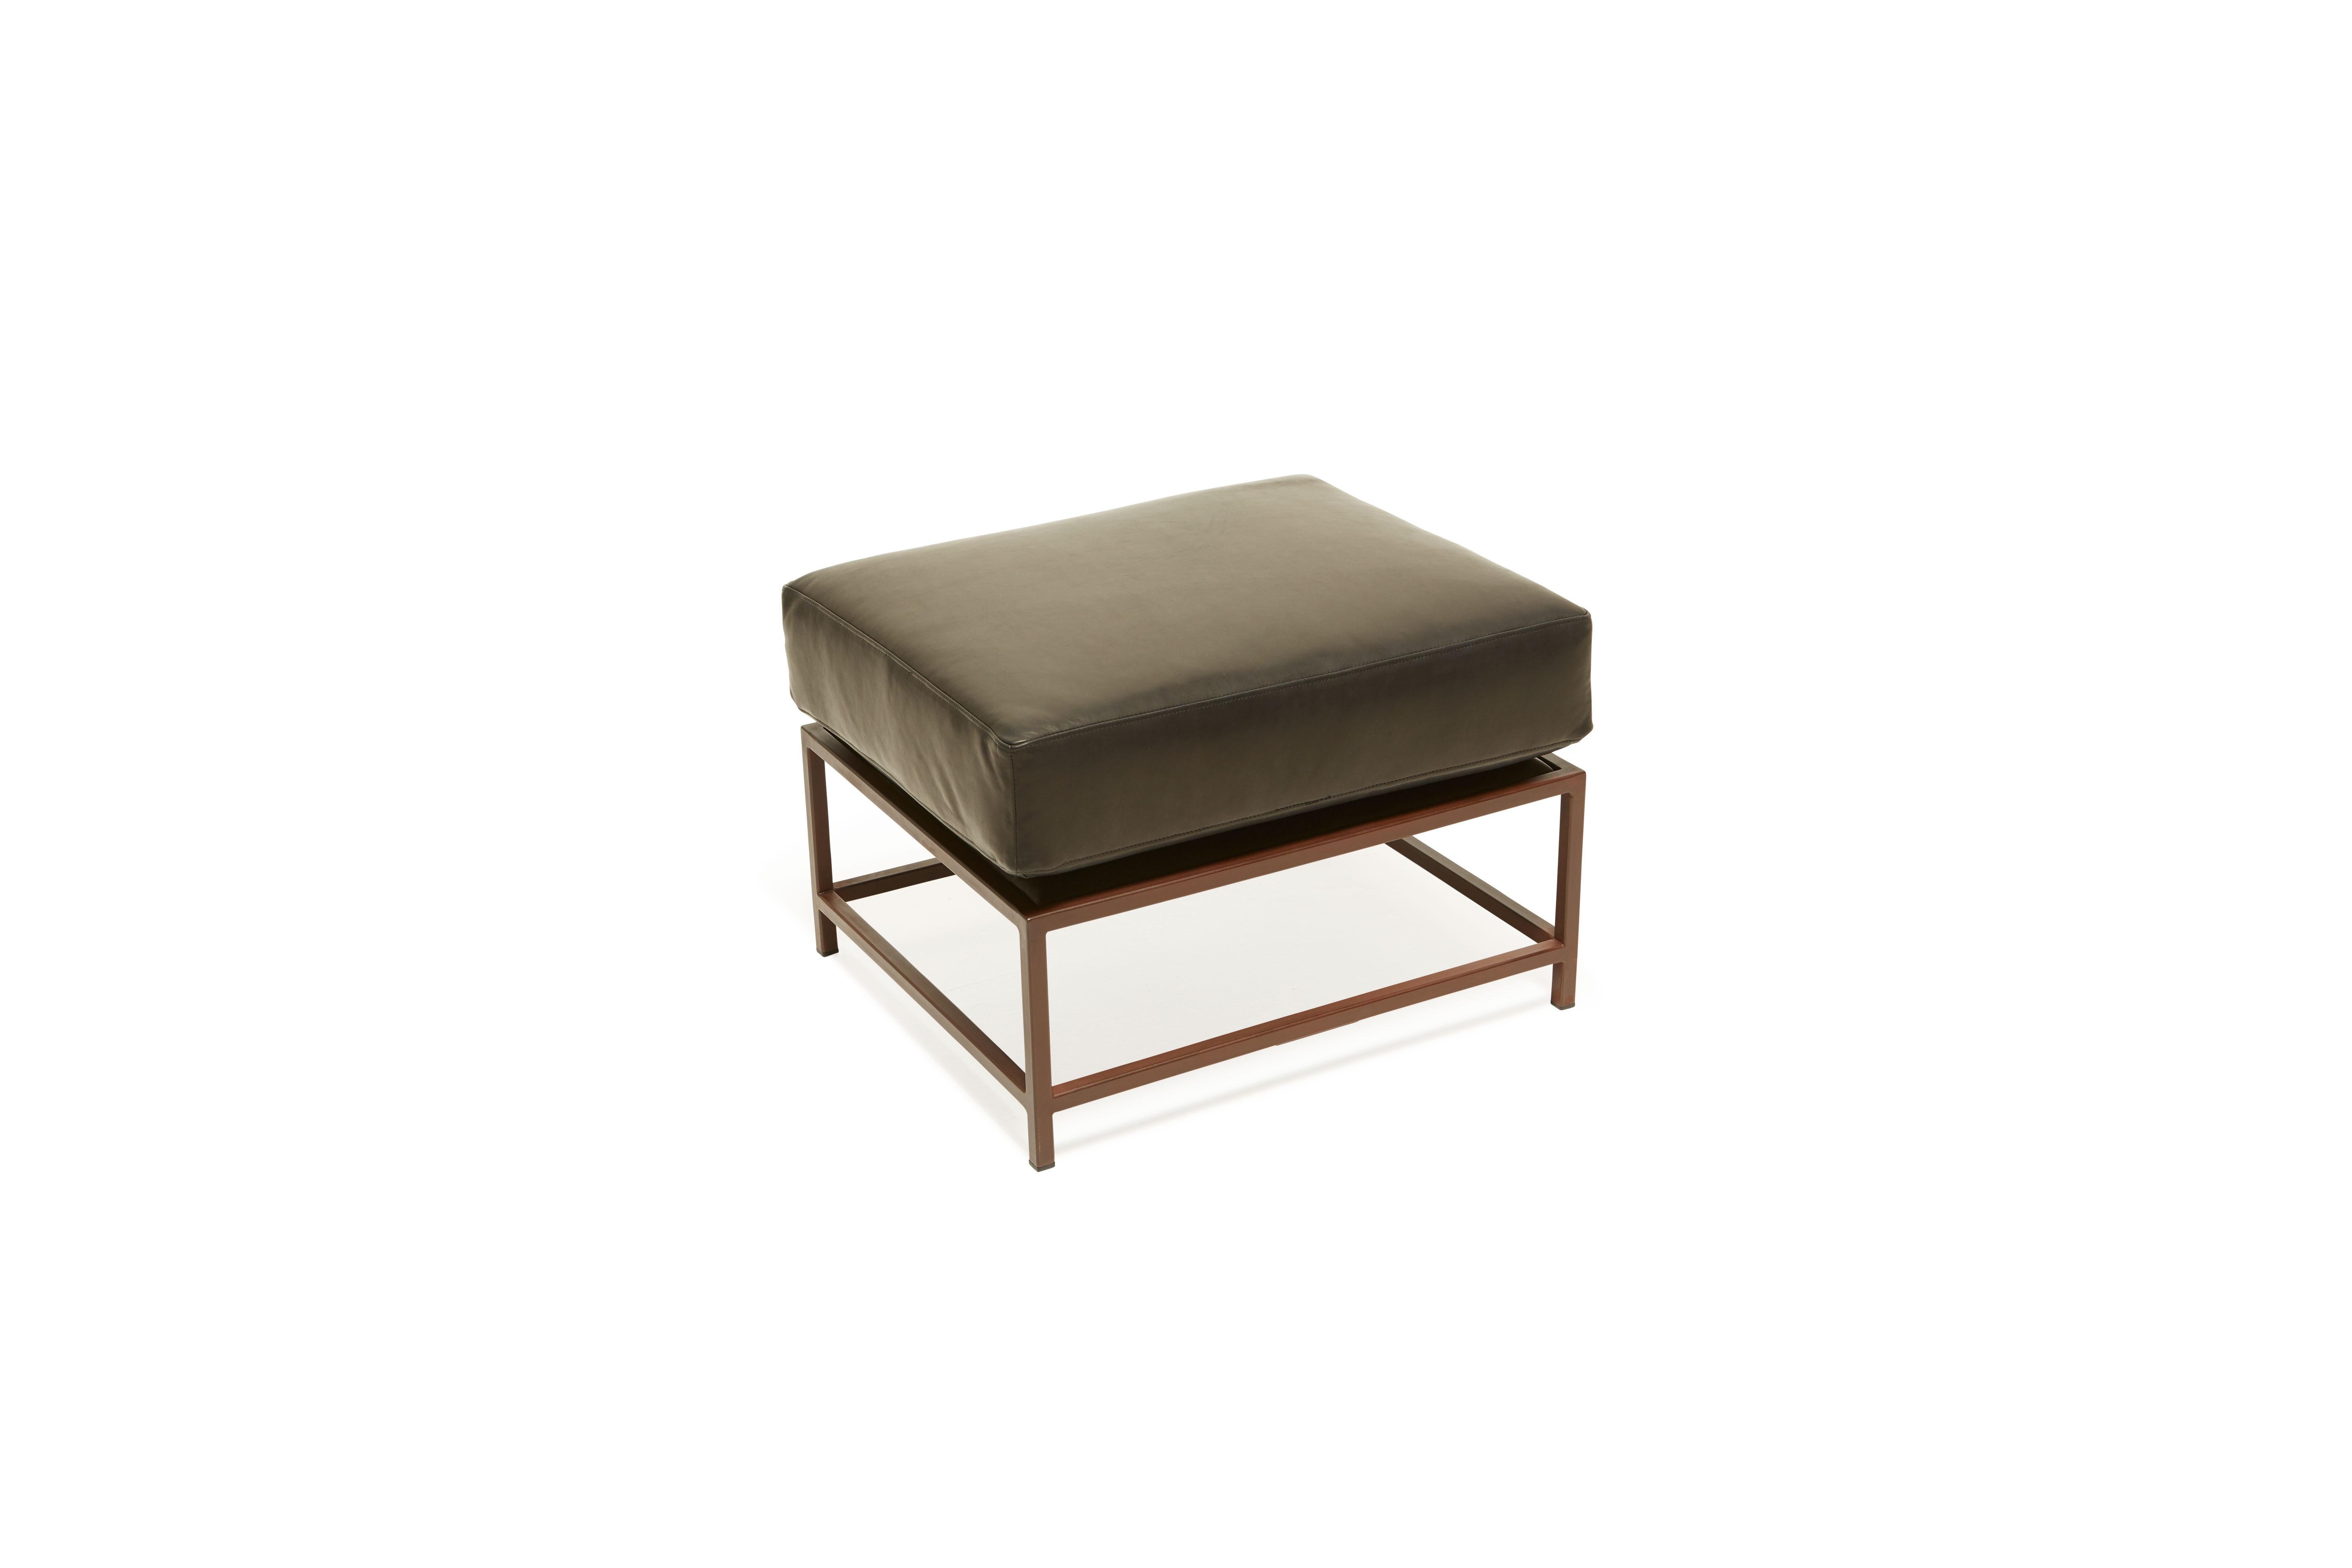 Designed to pair with any of the inheritance seating options, the ottoman is a great addition to add a lounge element to your seating arrangement. 

This variation is upholstered in a deep, dark granite leather. The foam seat cushions have been